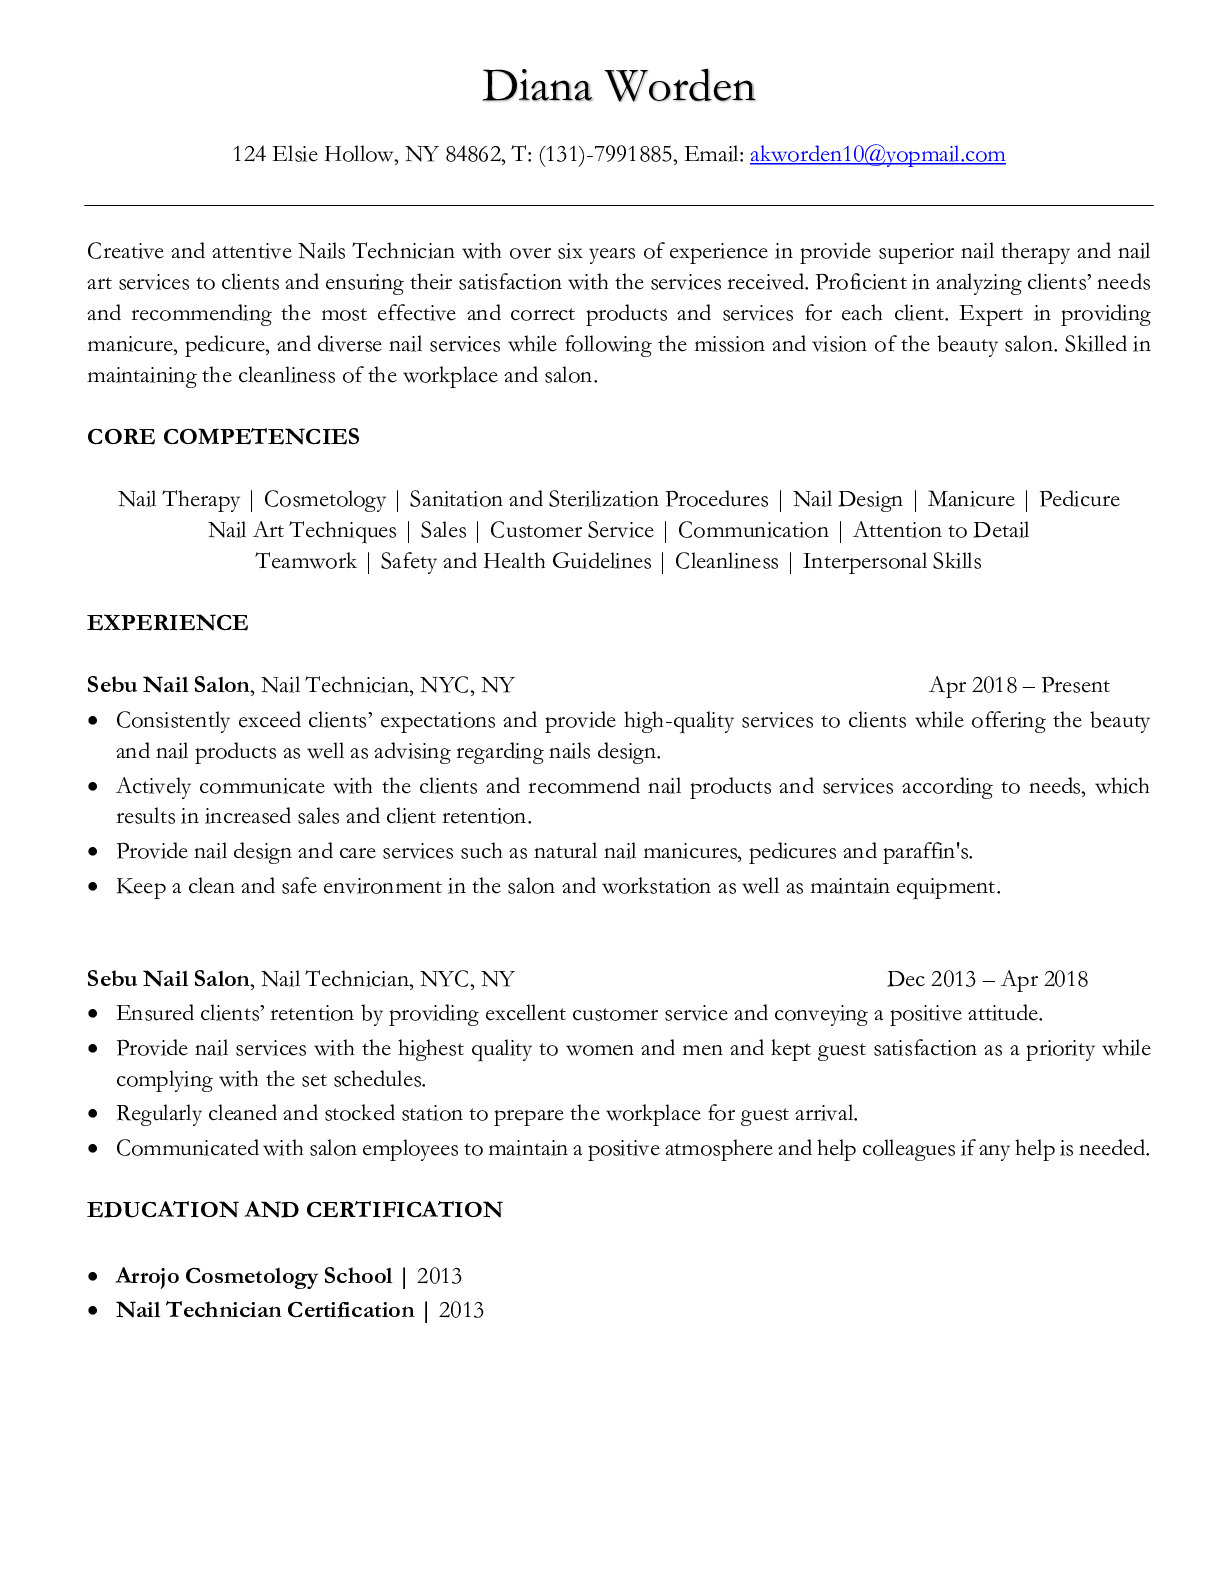 Nail Technician Resume Example with Skills and Description